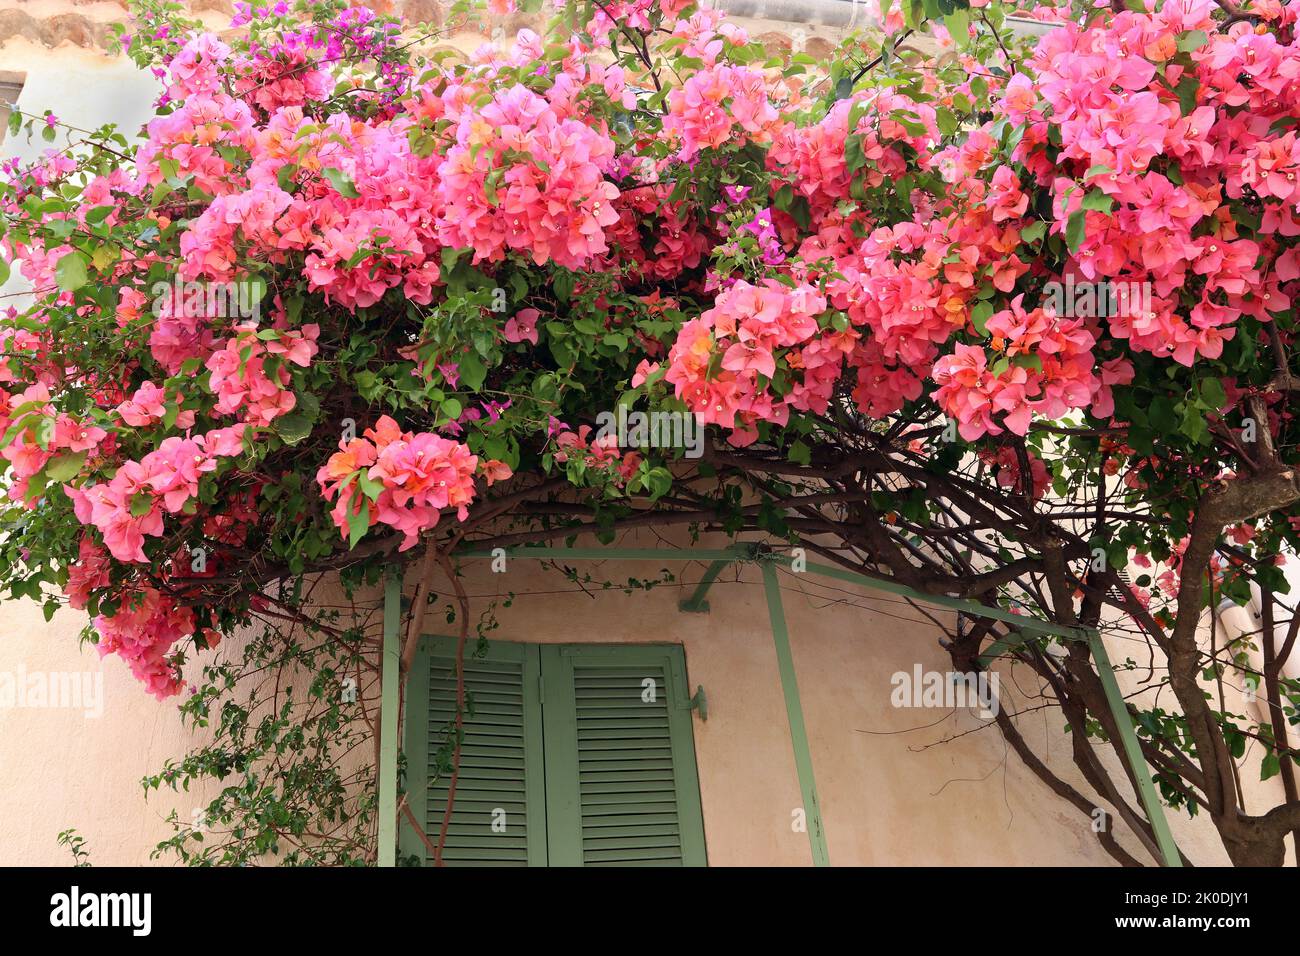 A beautiful pink bougainvillea is trained above a green shutter.  St Tropez, May.  Generic image. Stock Photo